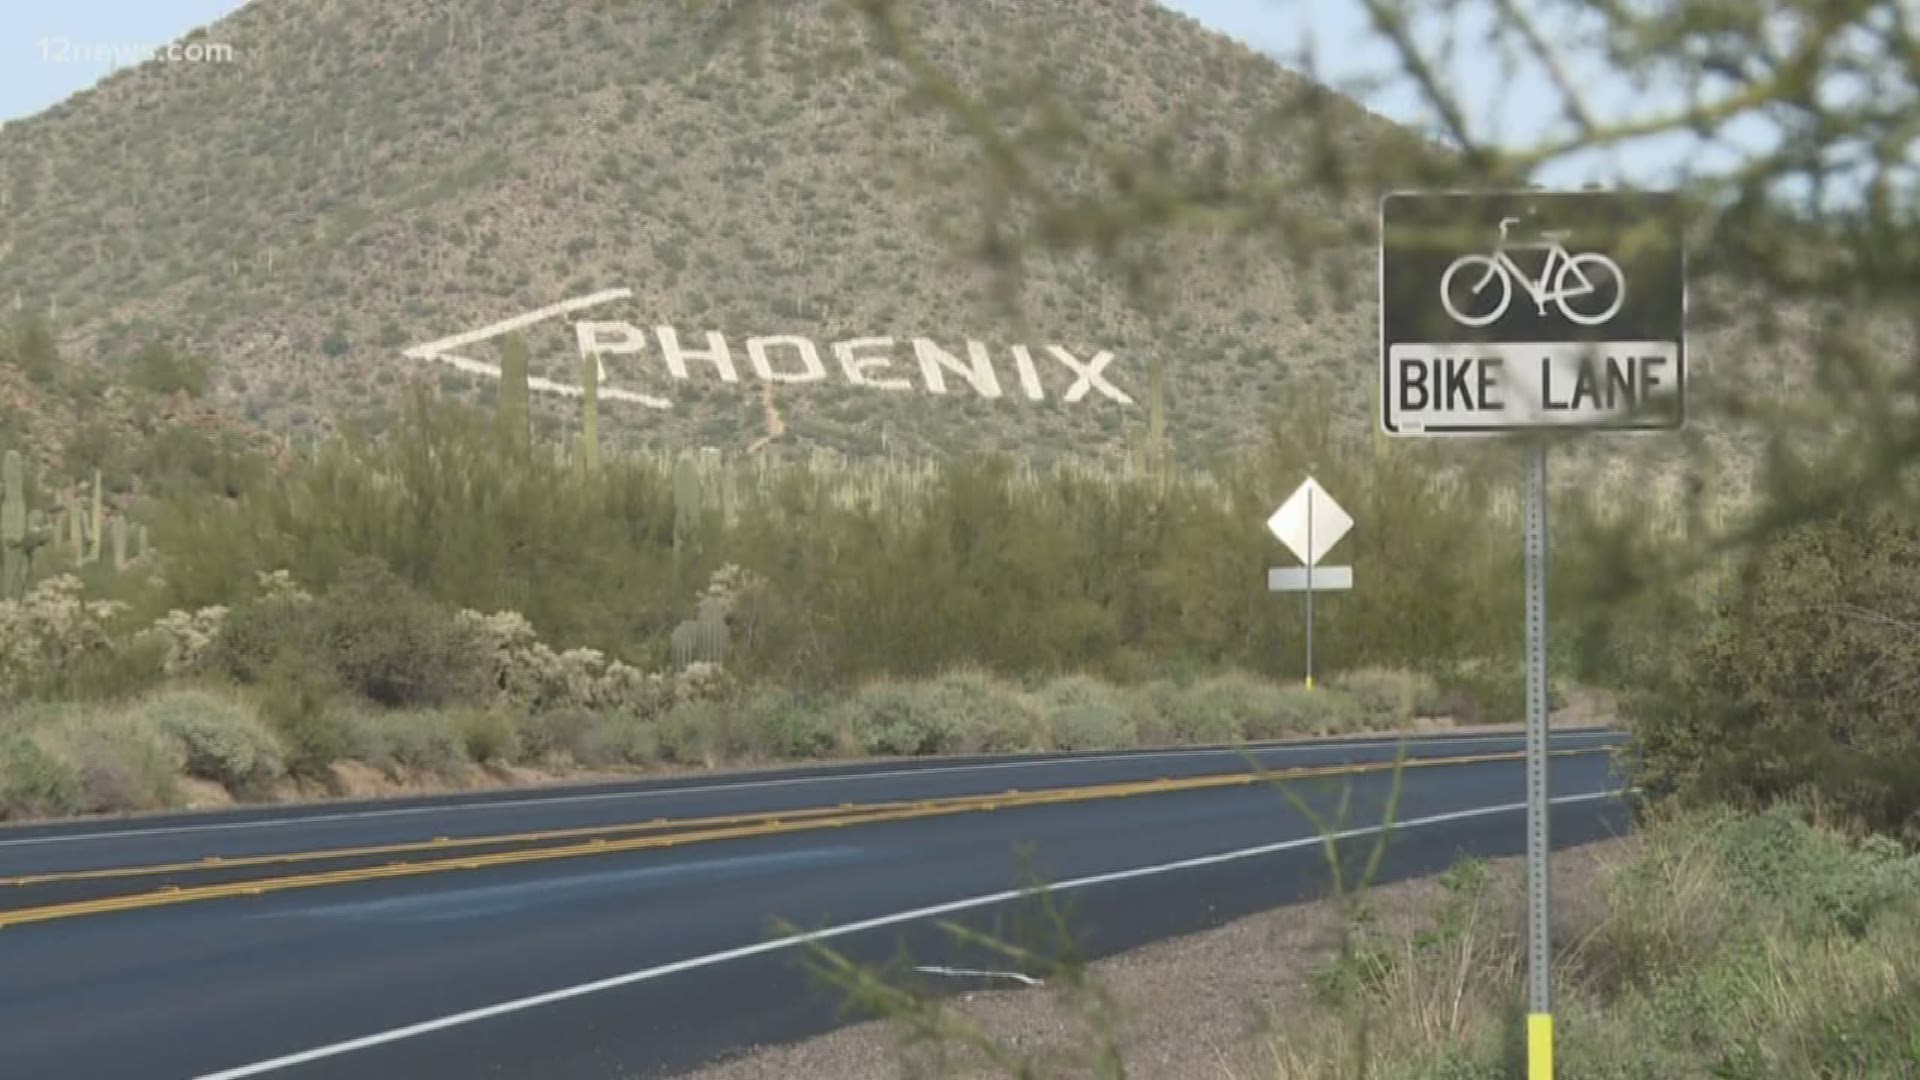 A sign that was put up in the 1950s to help guide people to Phoenix needed a bit of cleanup, so a group of current day boy scouts decided to spruce it up.